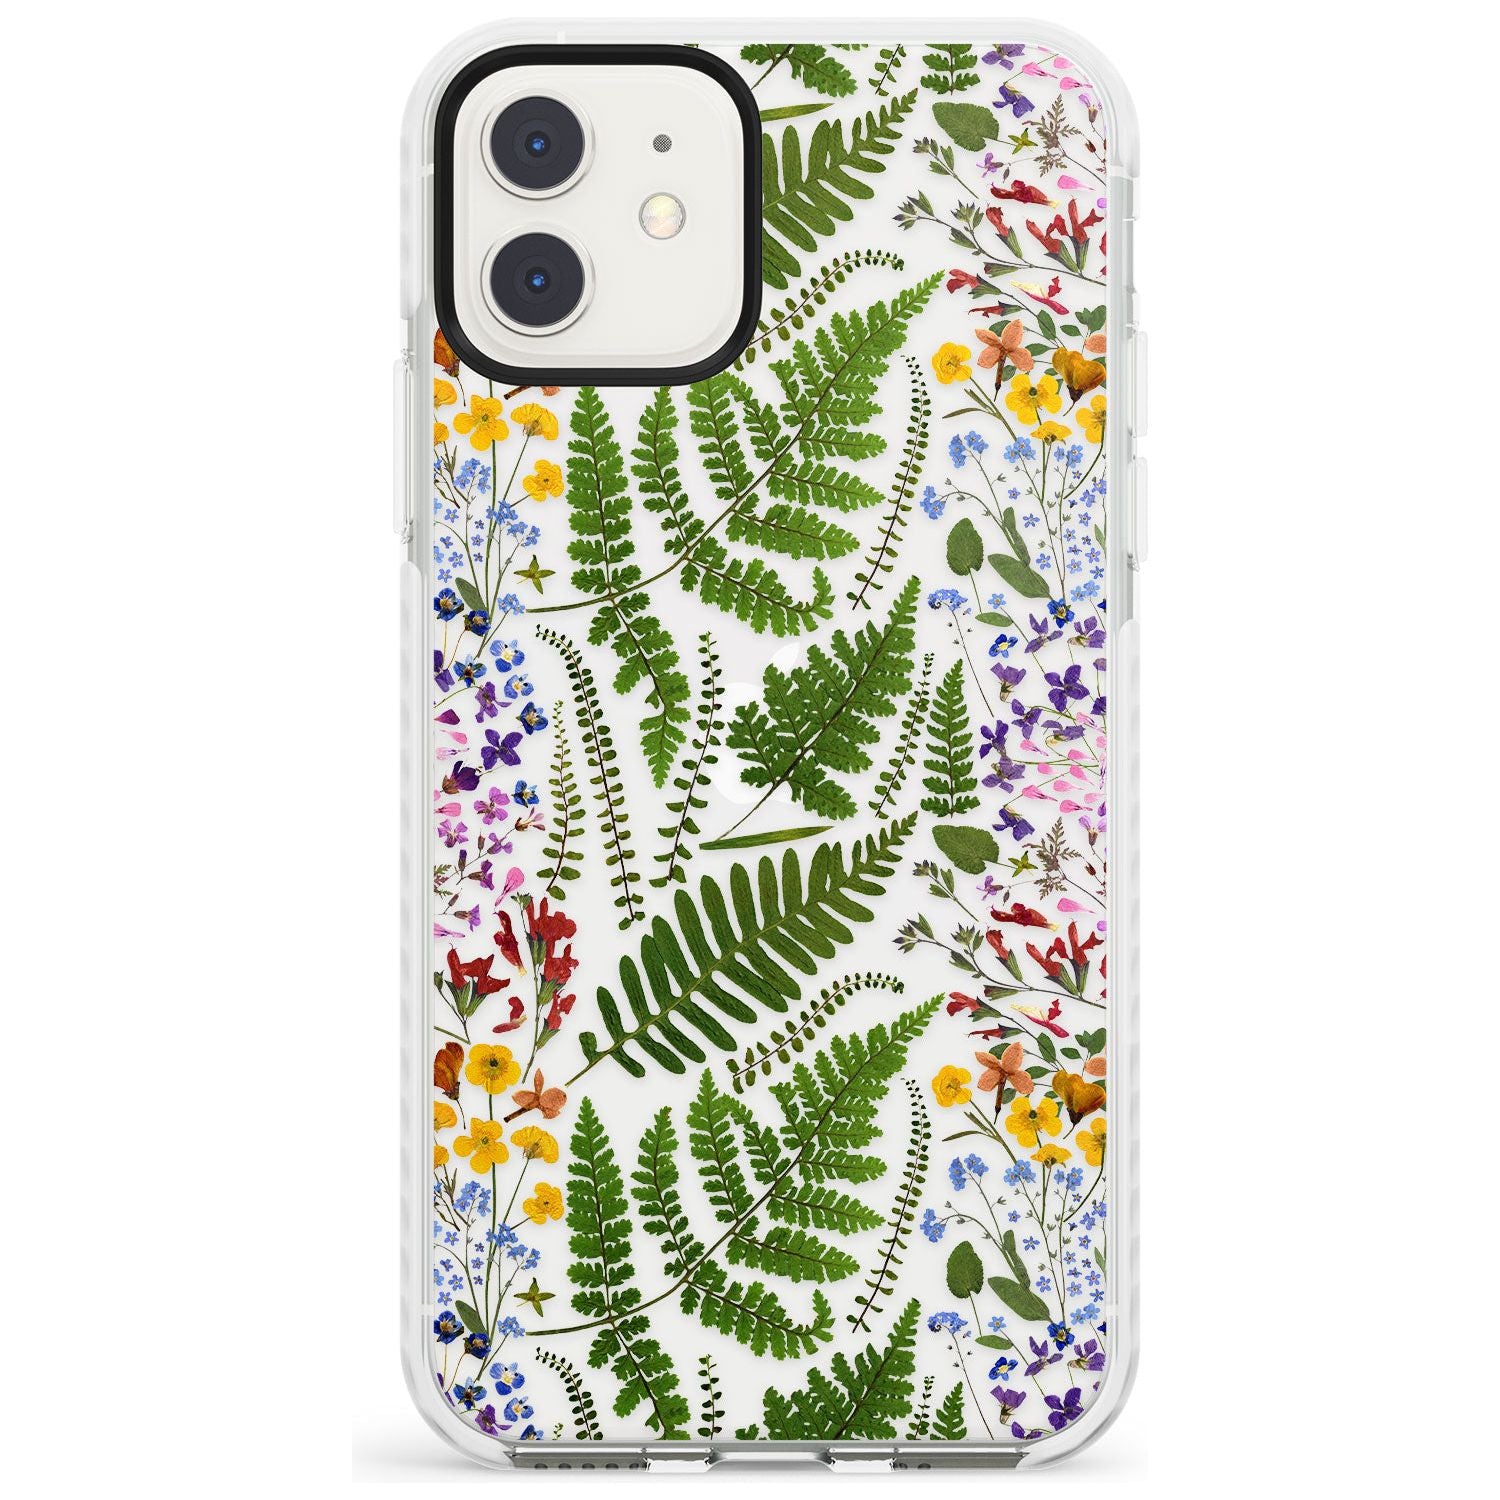 Busy Floral and Fern Design Impact Phone Case for iPhone 11